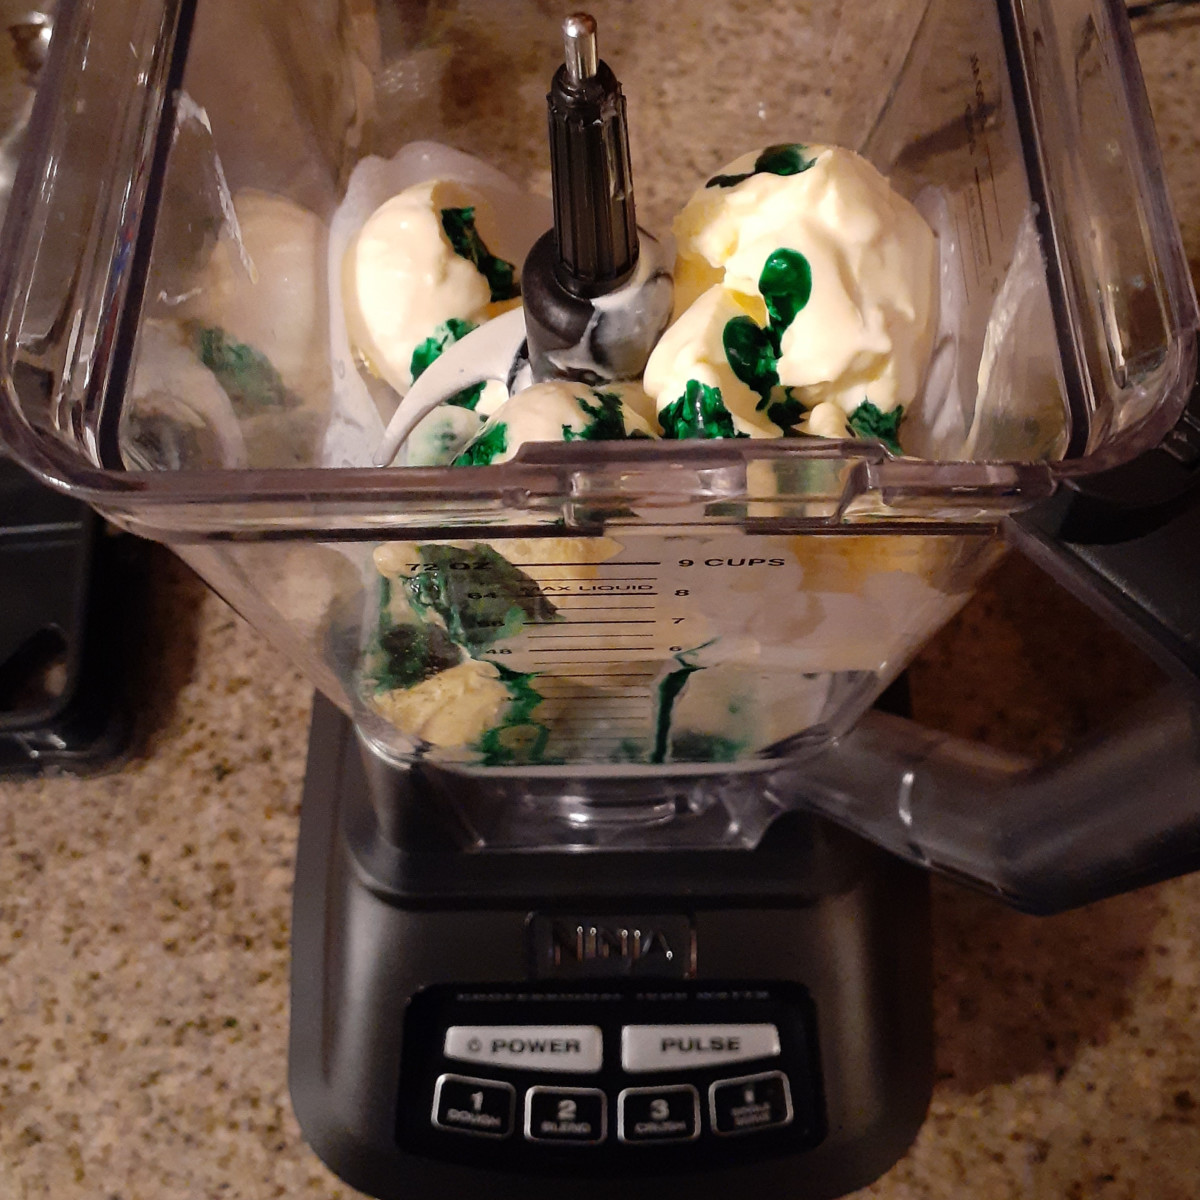 In a blender, add ice cream, heavy cream, mint extract, and green food coloring. Blend until smooth.